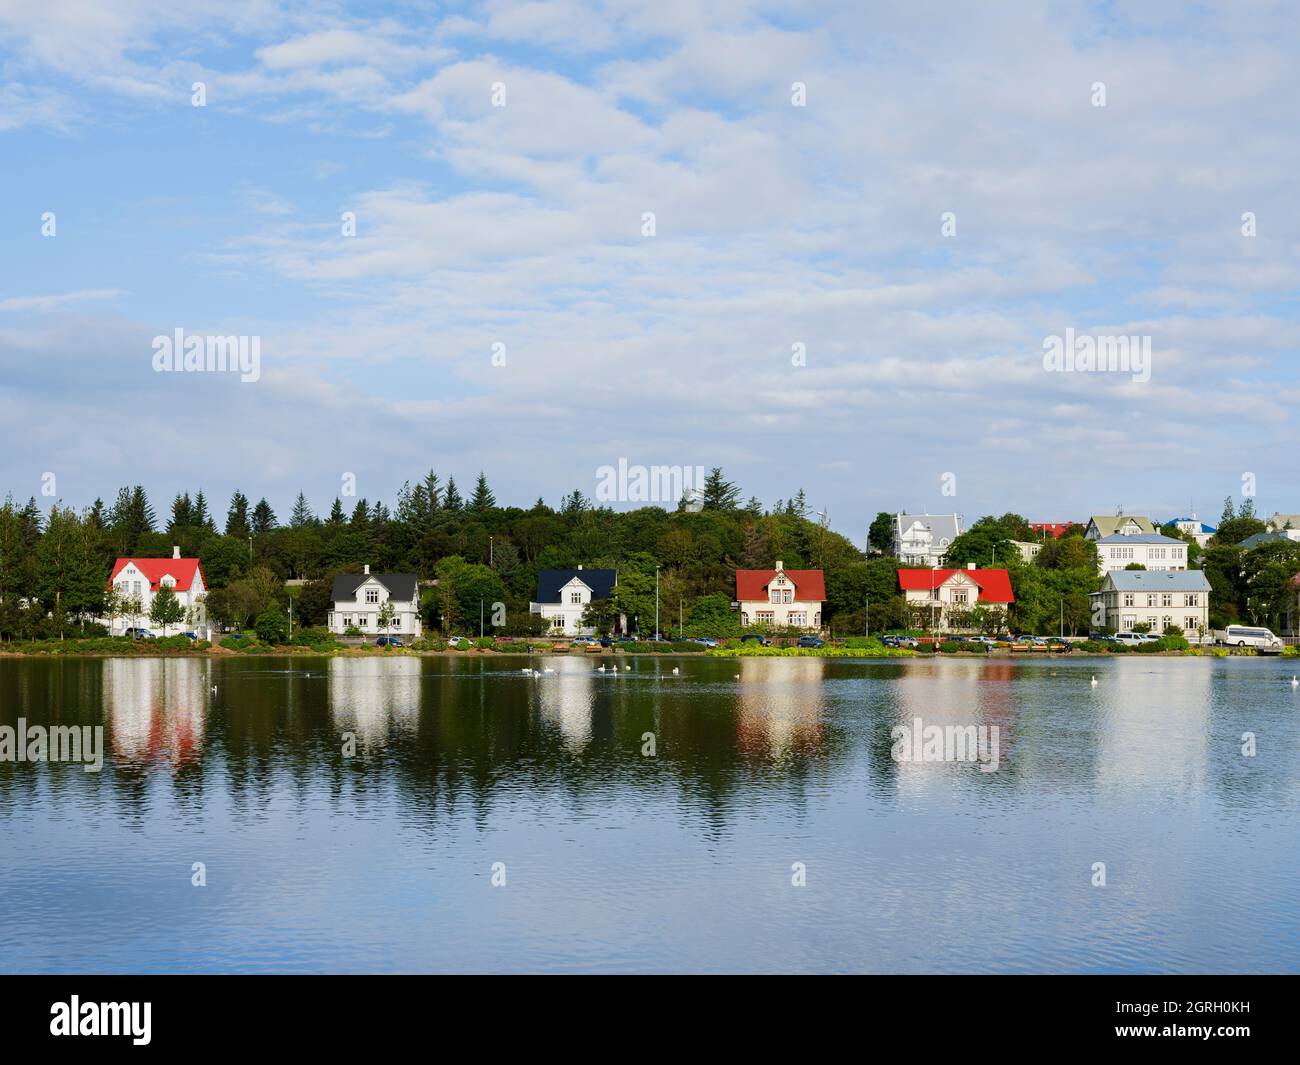 The pond in the City center of Reykjavik, Iceland. Stock Photo